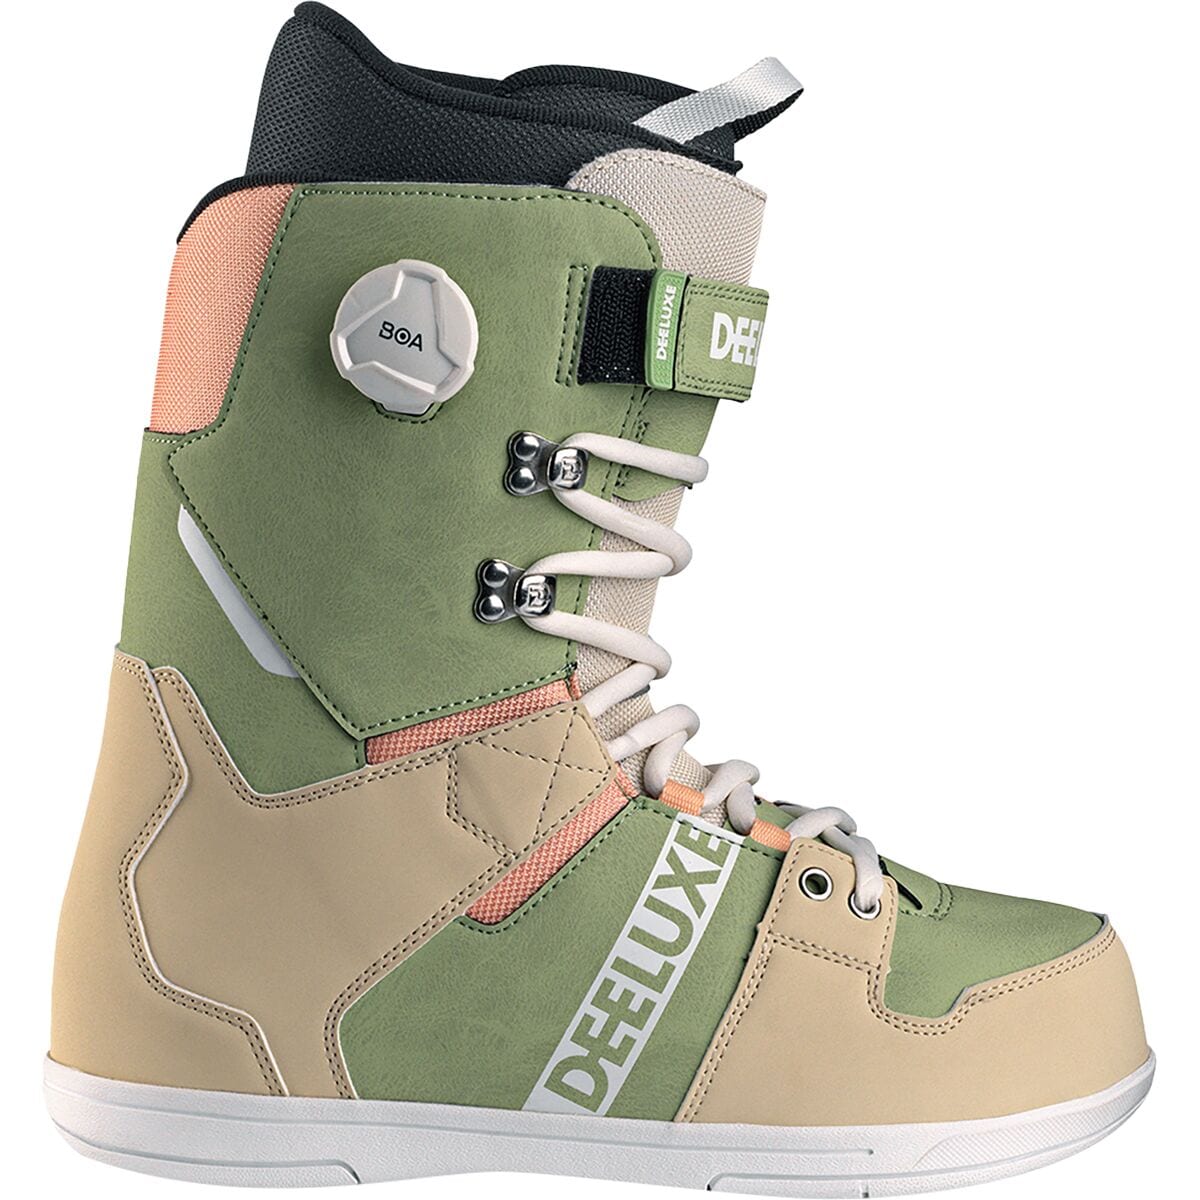 Snowboard Boots | Backcountry.com